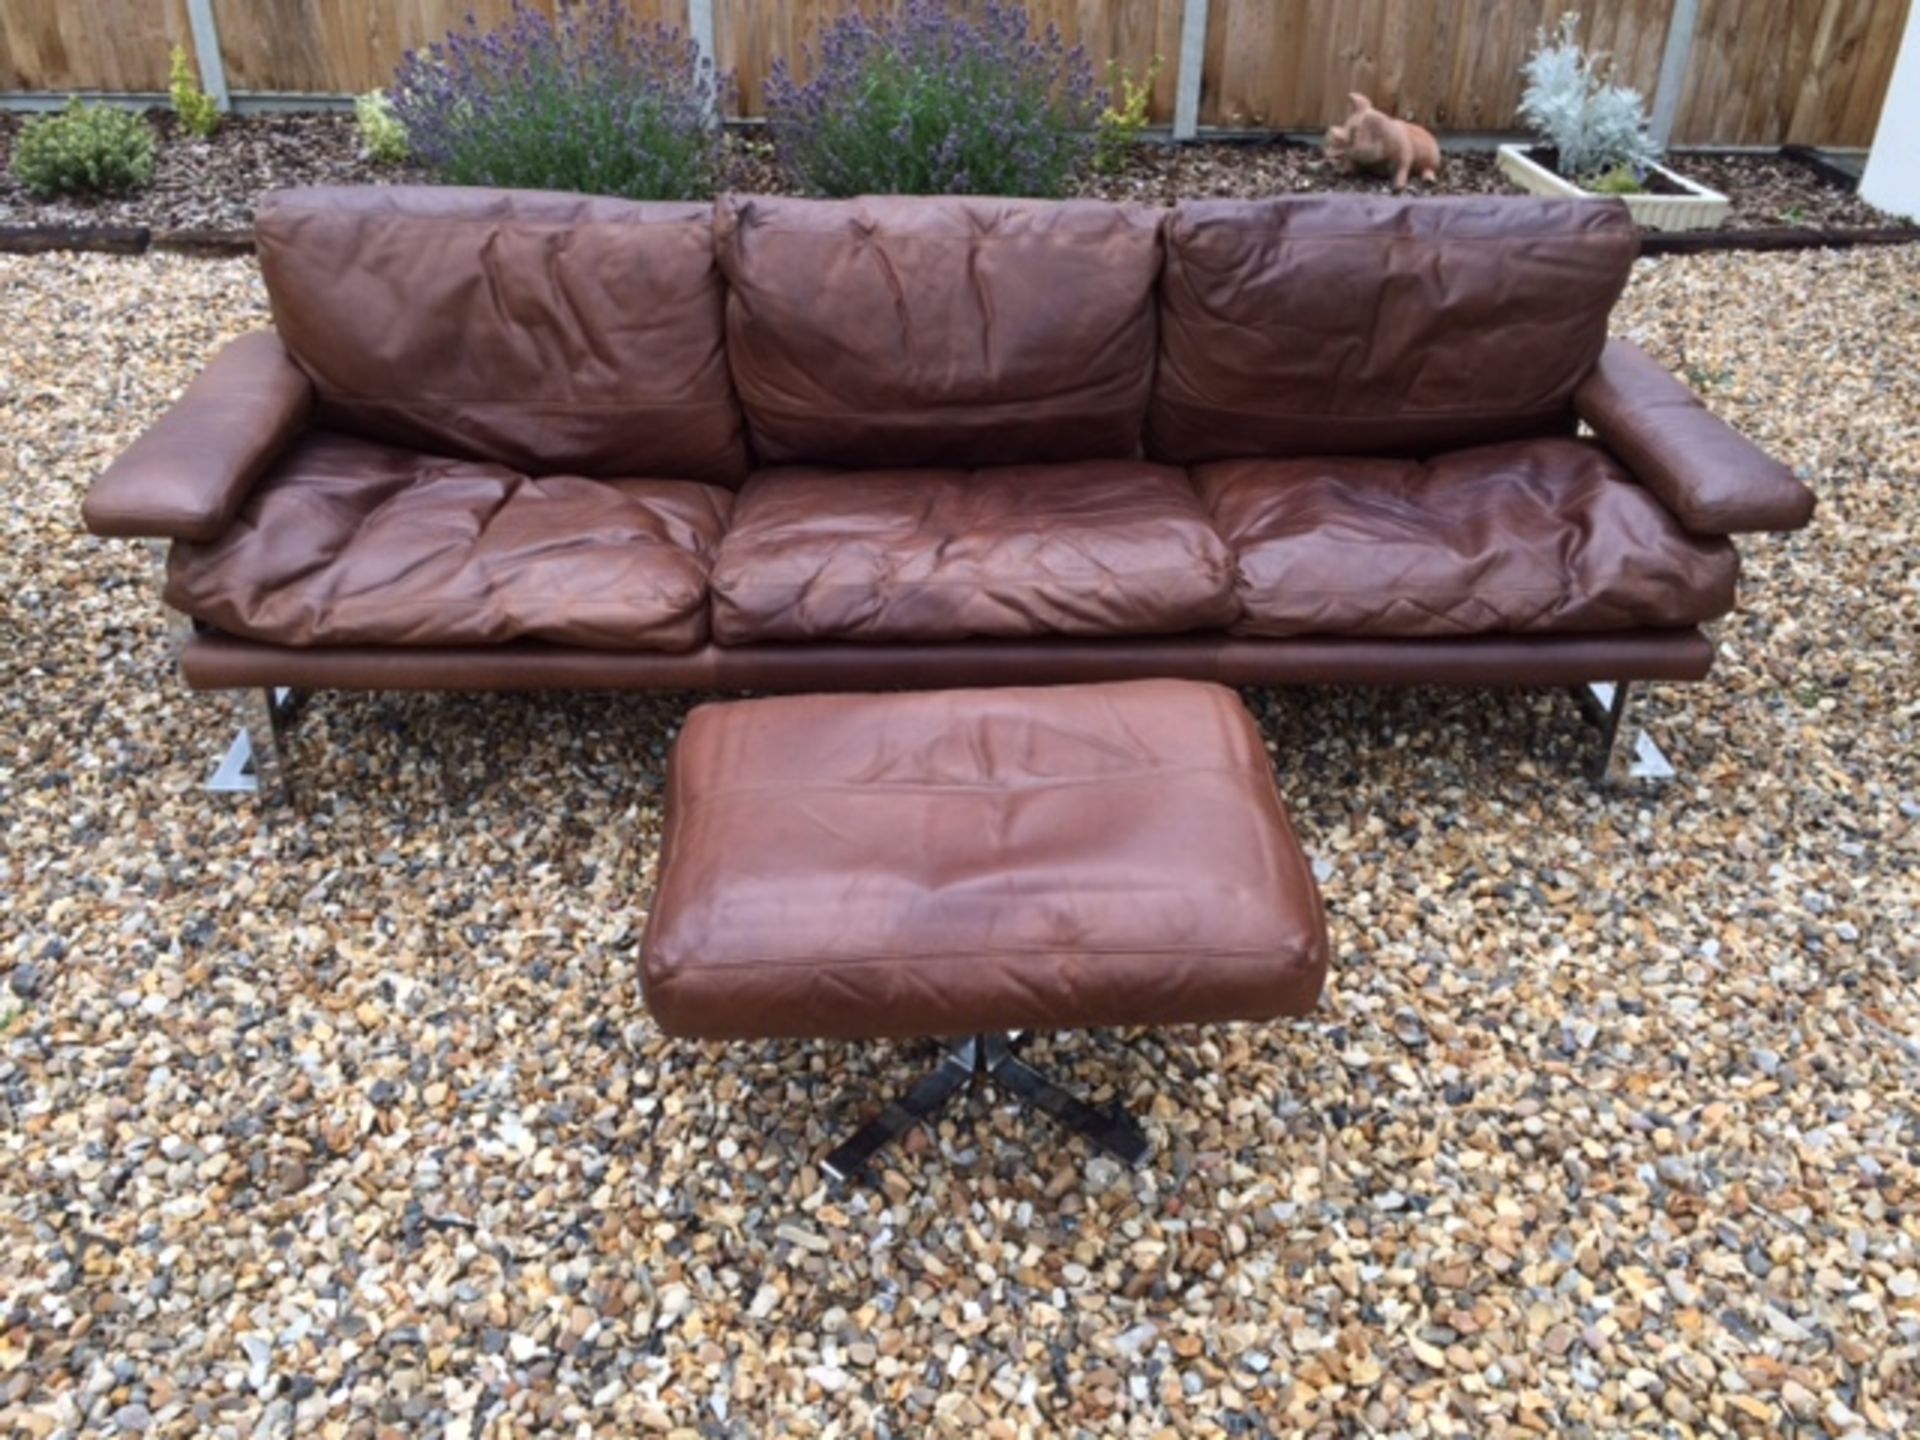 Rare Pieff vintage retro 70s brown leather 3 seater sofa, 2 seater sofa, chair and stool.